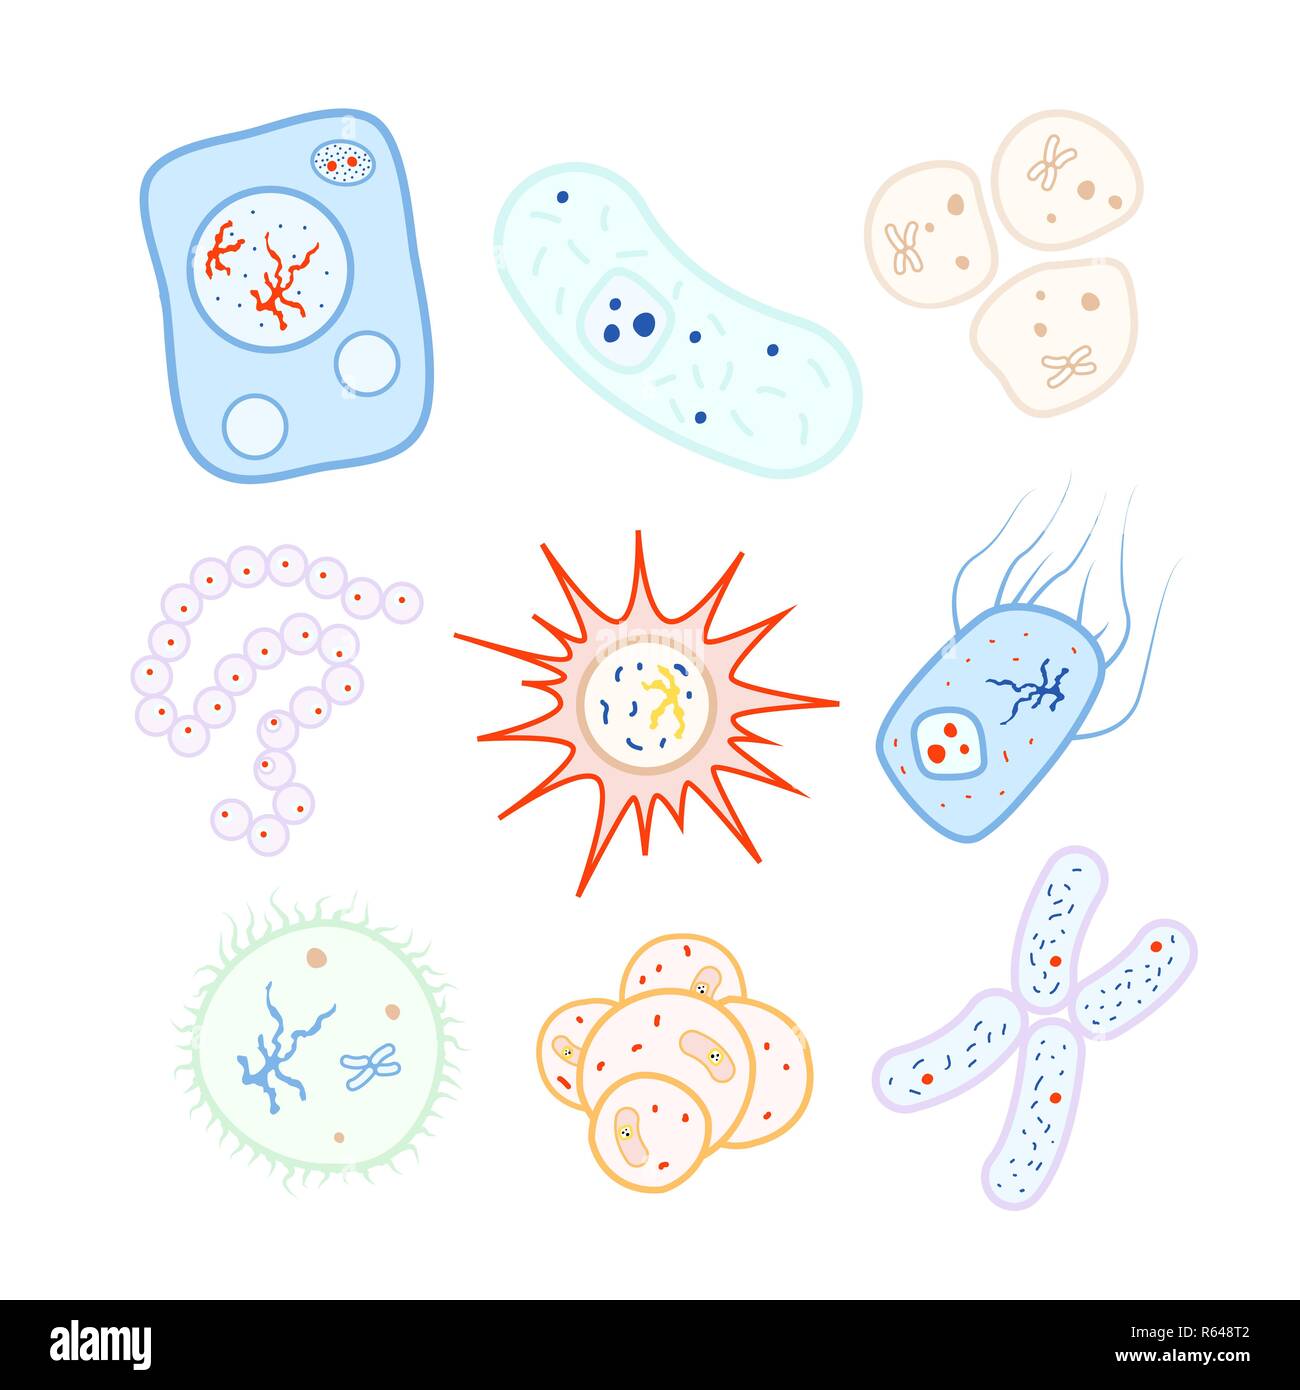 Large set of bright colorful biology cells, bacteria and virus icons on white Stock Vector